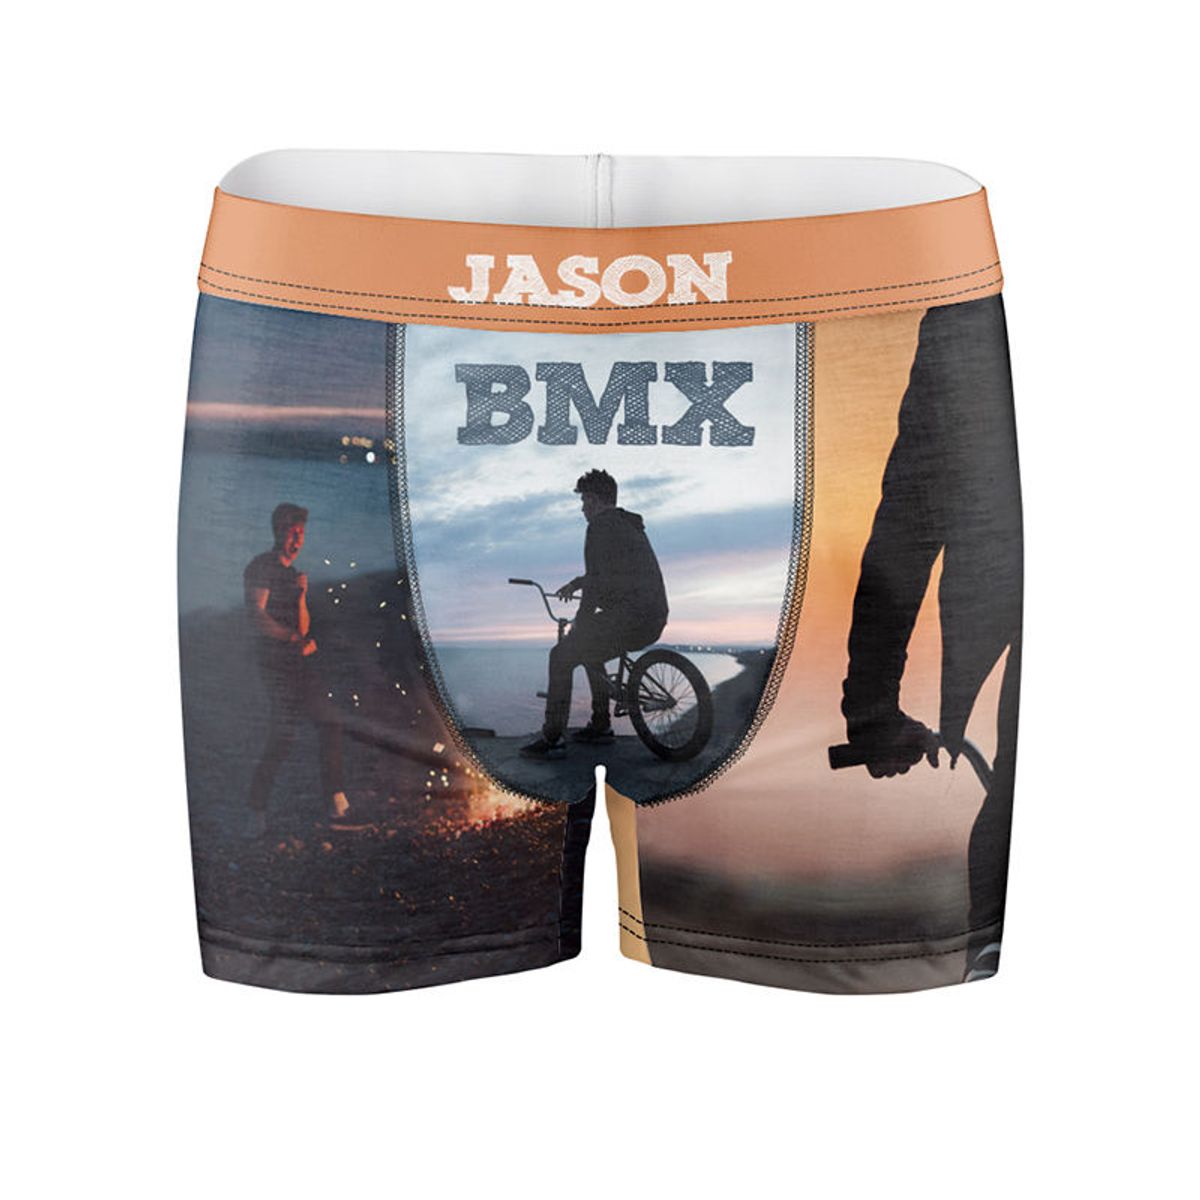 Personalised custom boxer briefs with face on them for men - CALLIE